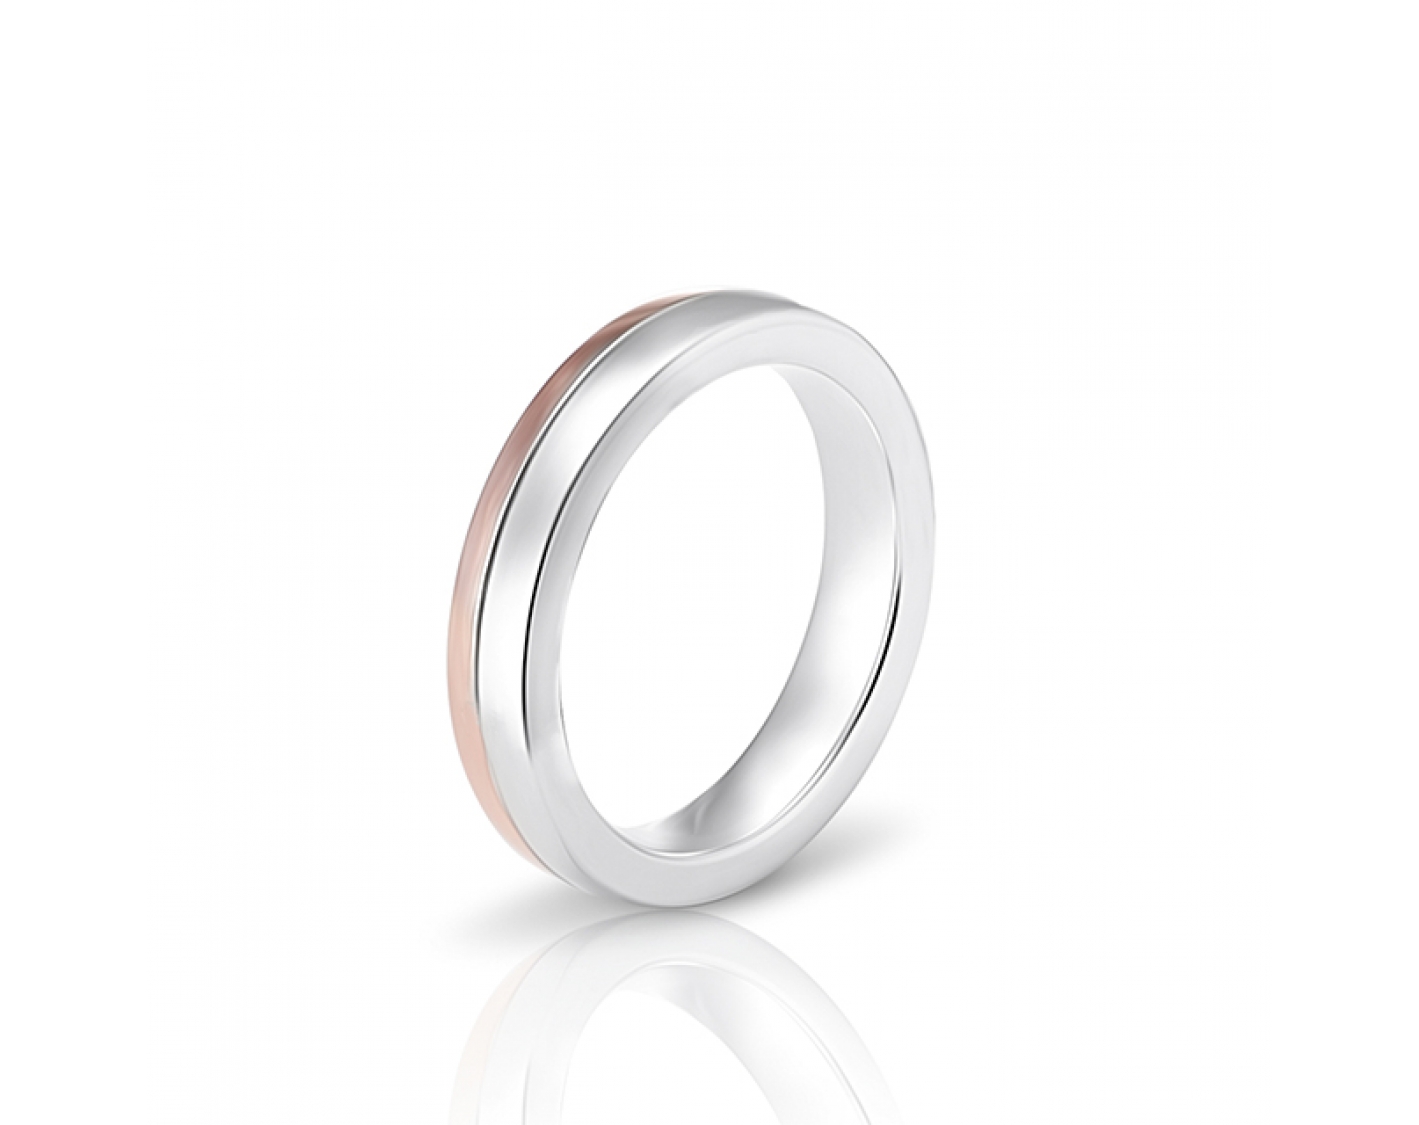 dual-tone 4mm two-toned* wedding band Photos & images